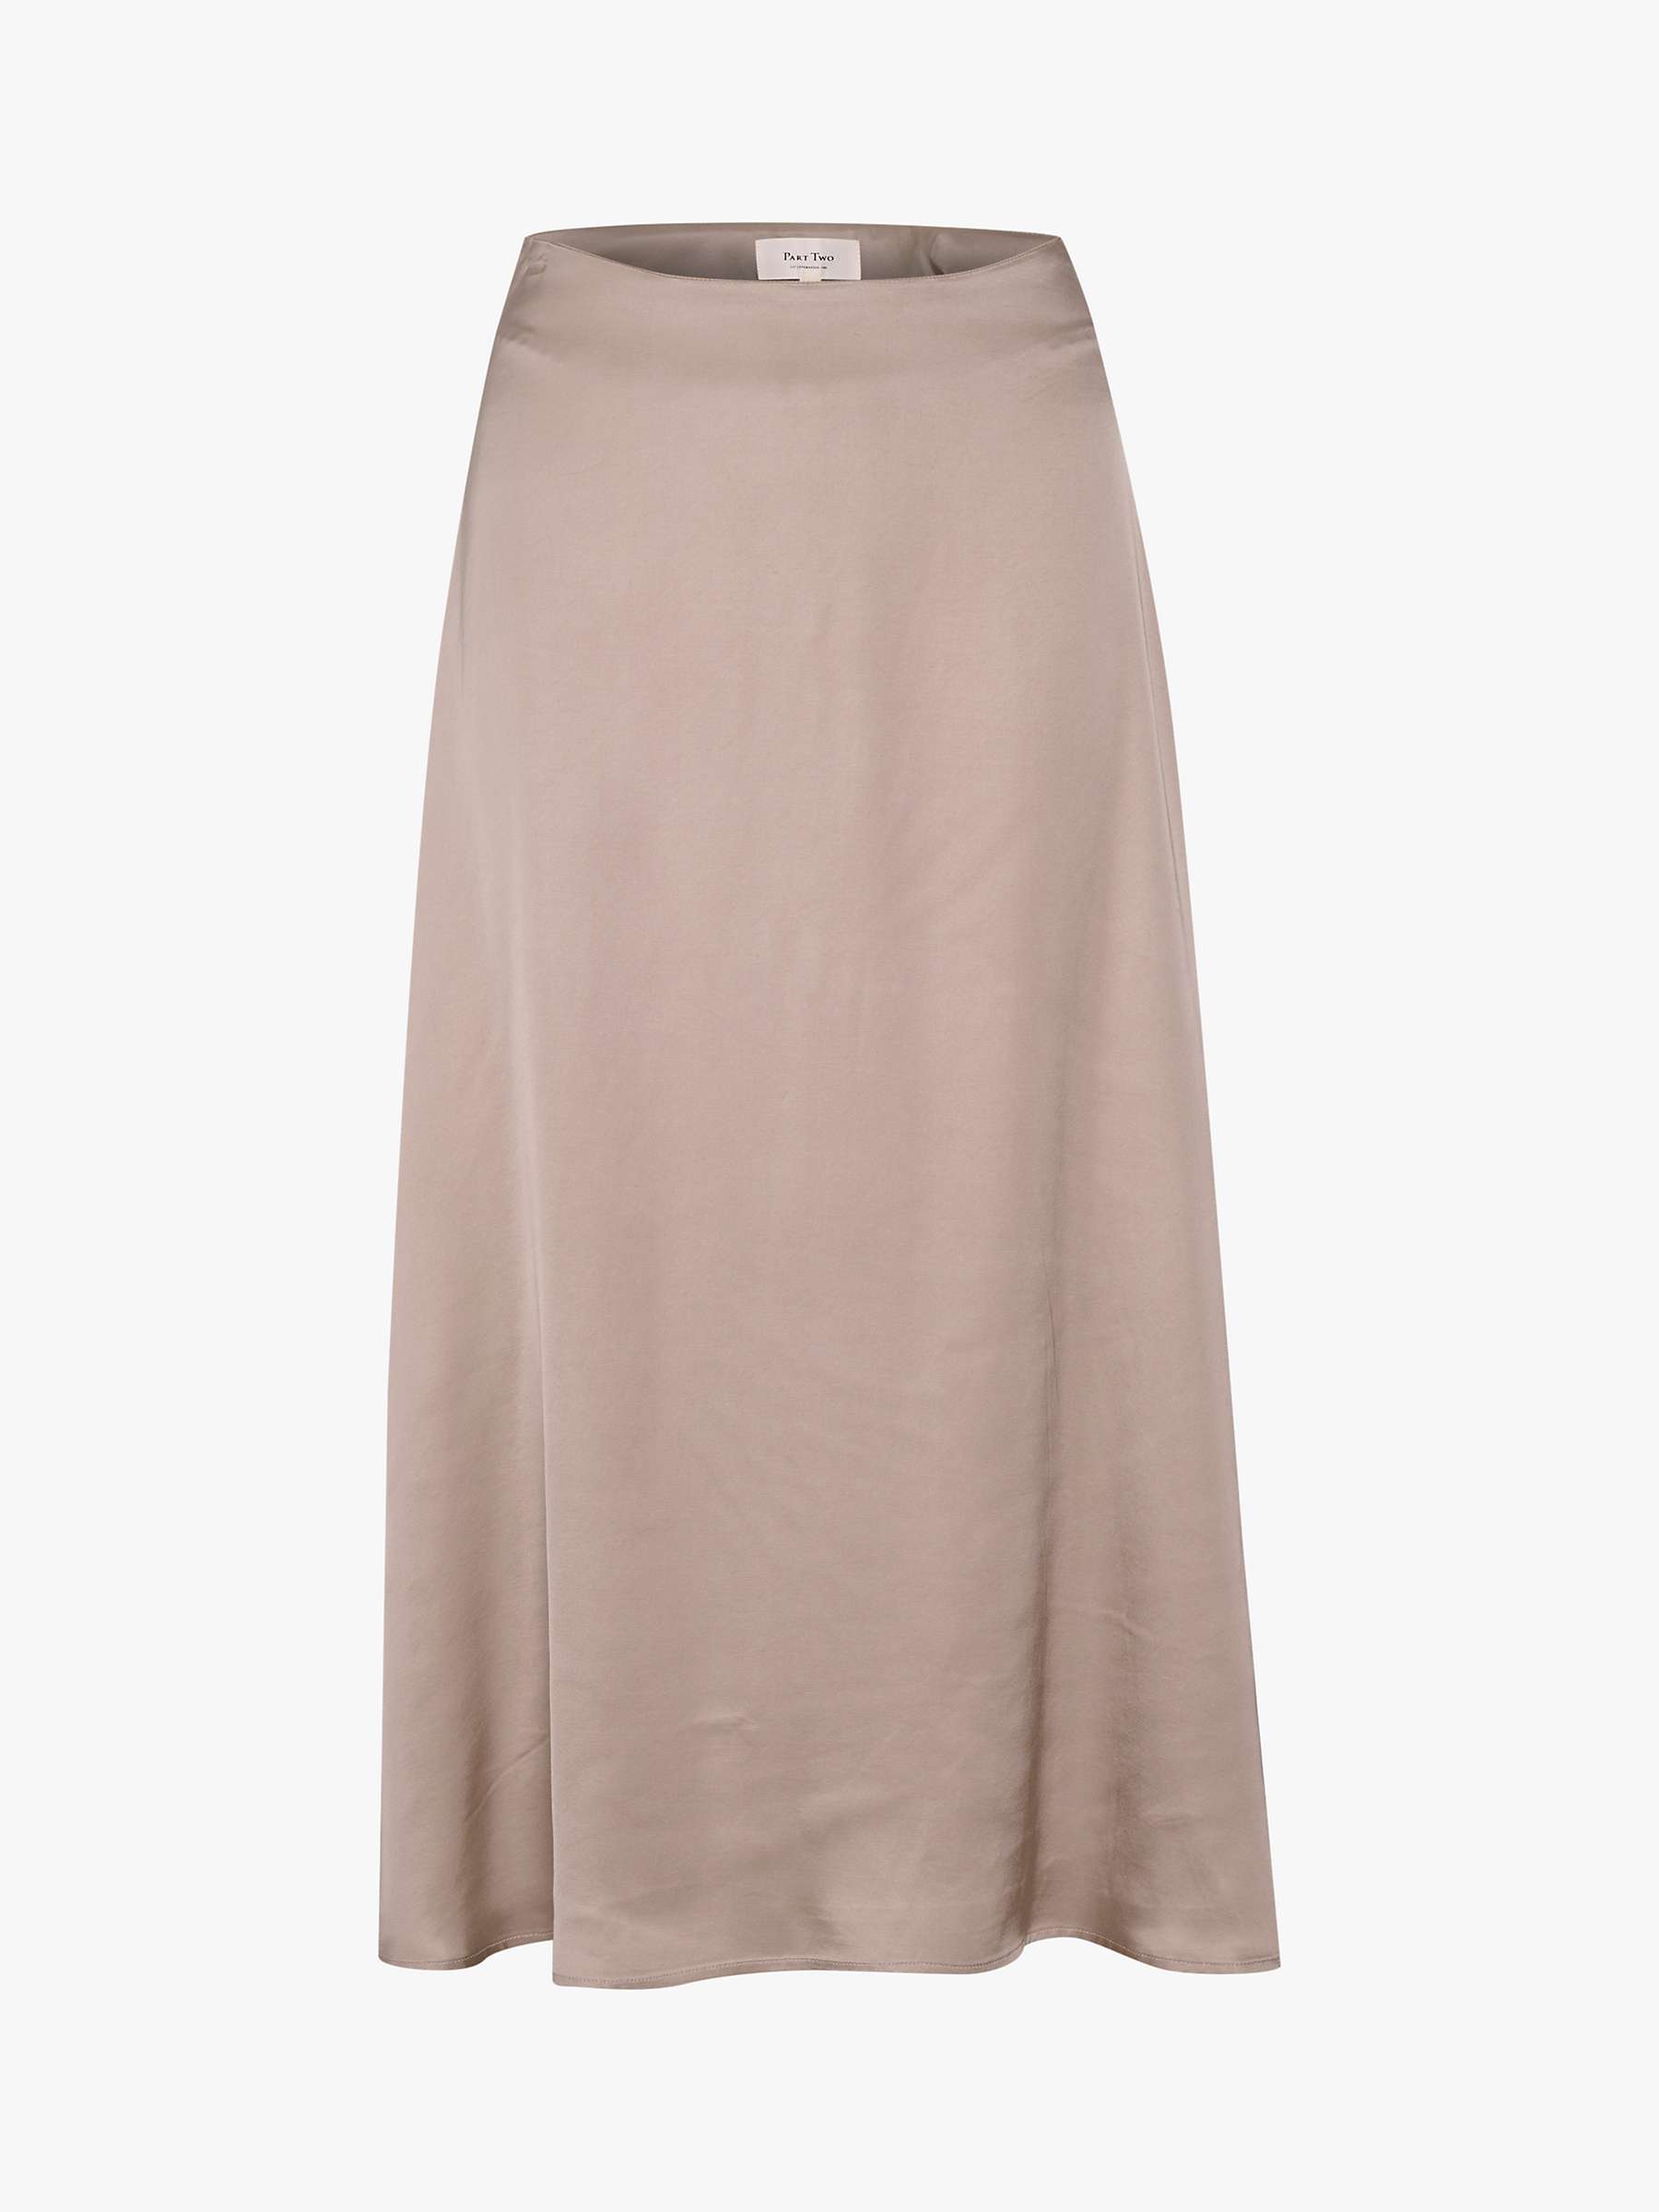 Part Two Liyann Midi Skirt, Feather Gray at John Lewis & Partners